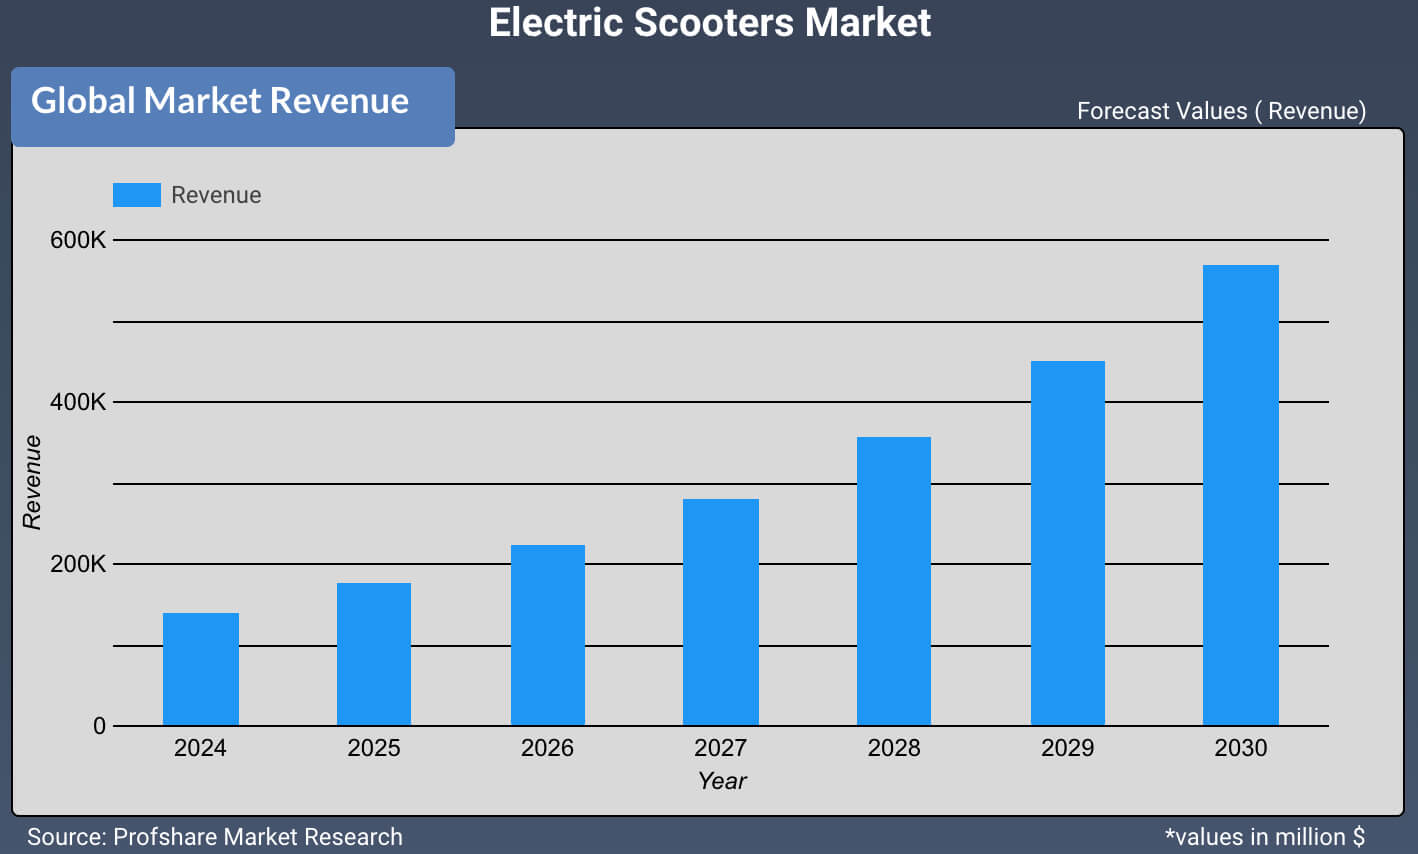 Electric Scooters Market